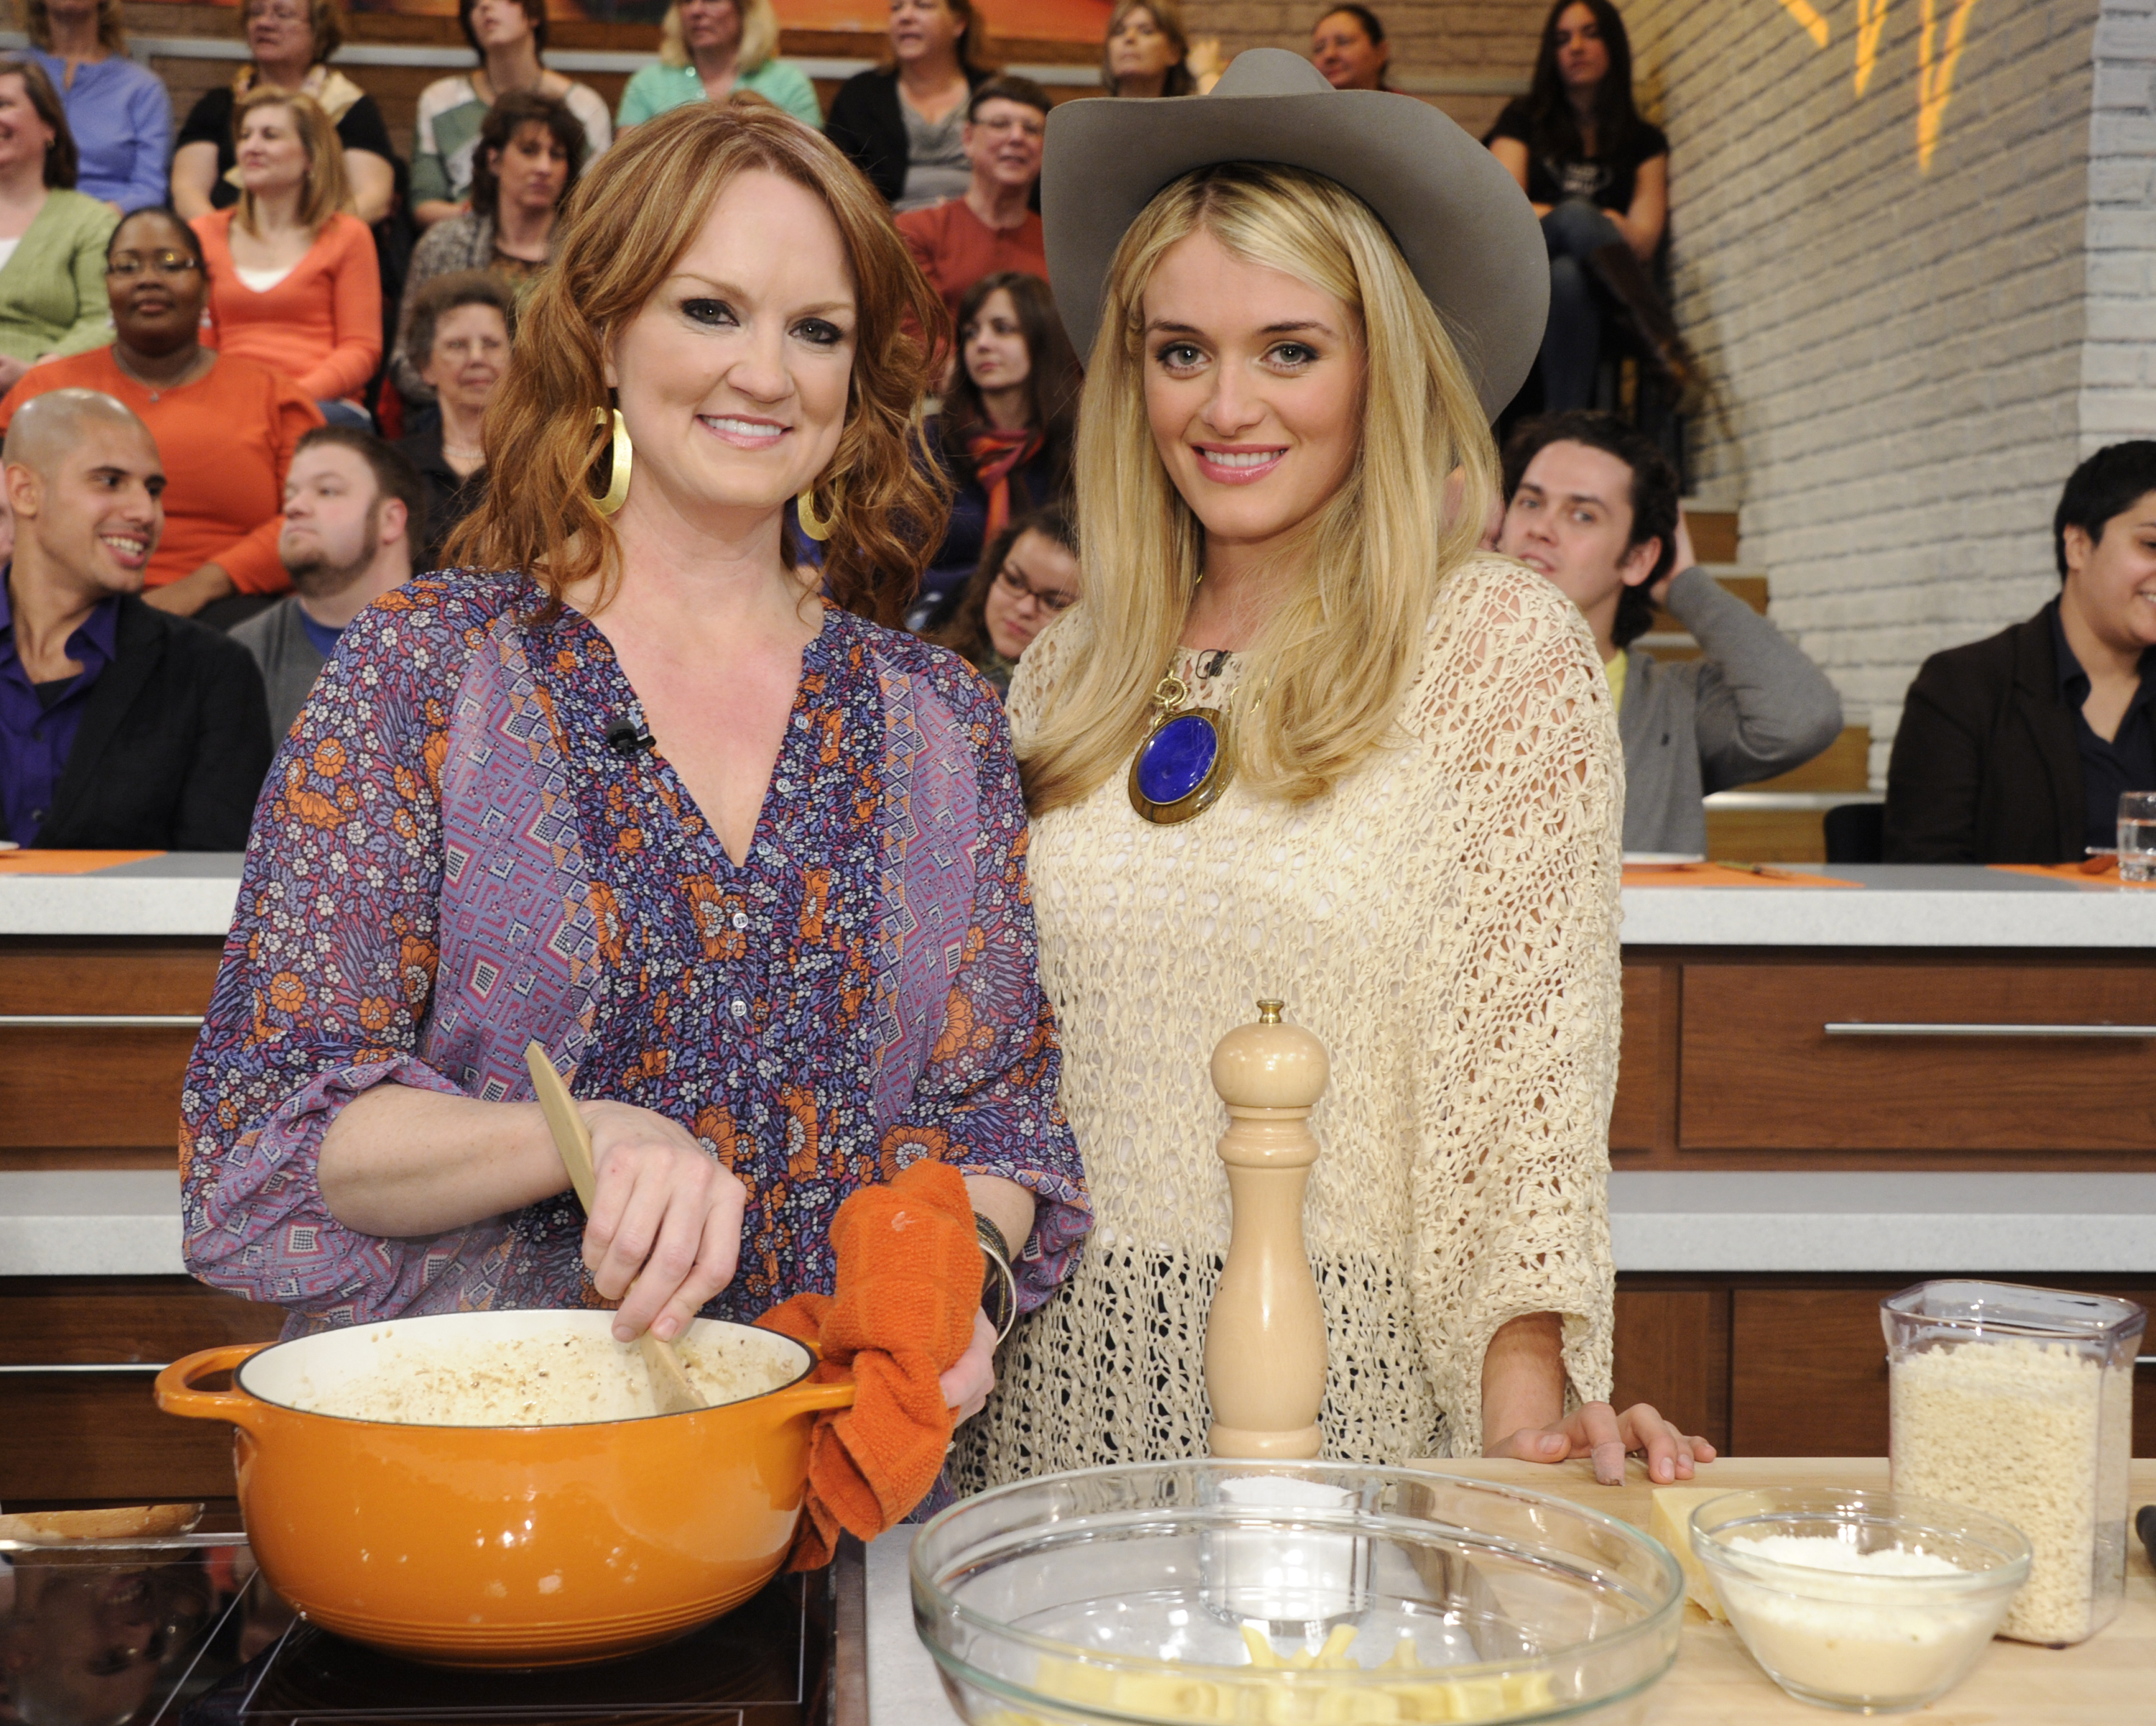 Ree Drummond and Daphne Oz do a cooking demonstration on CBS' The Chew.